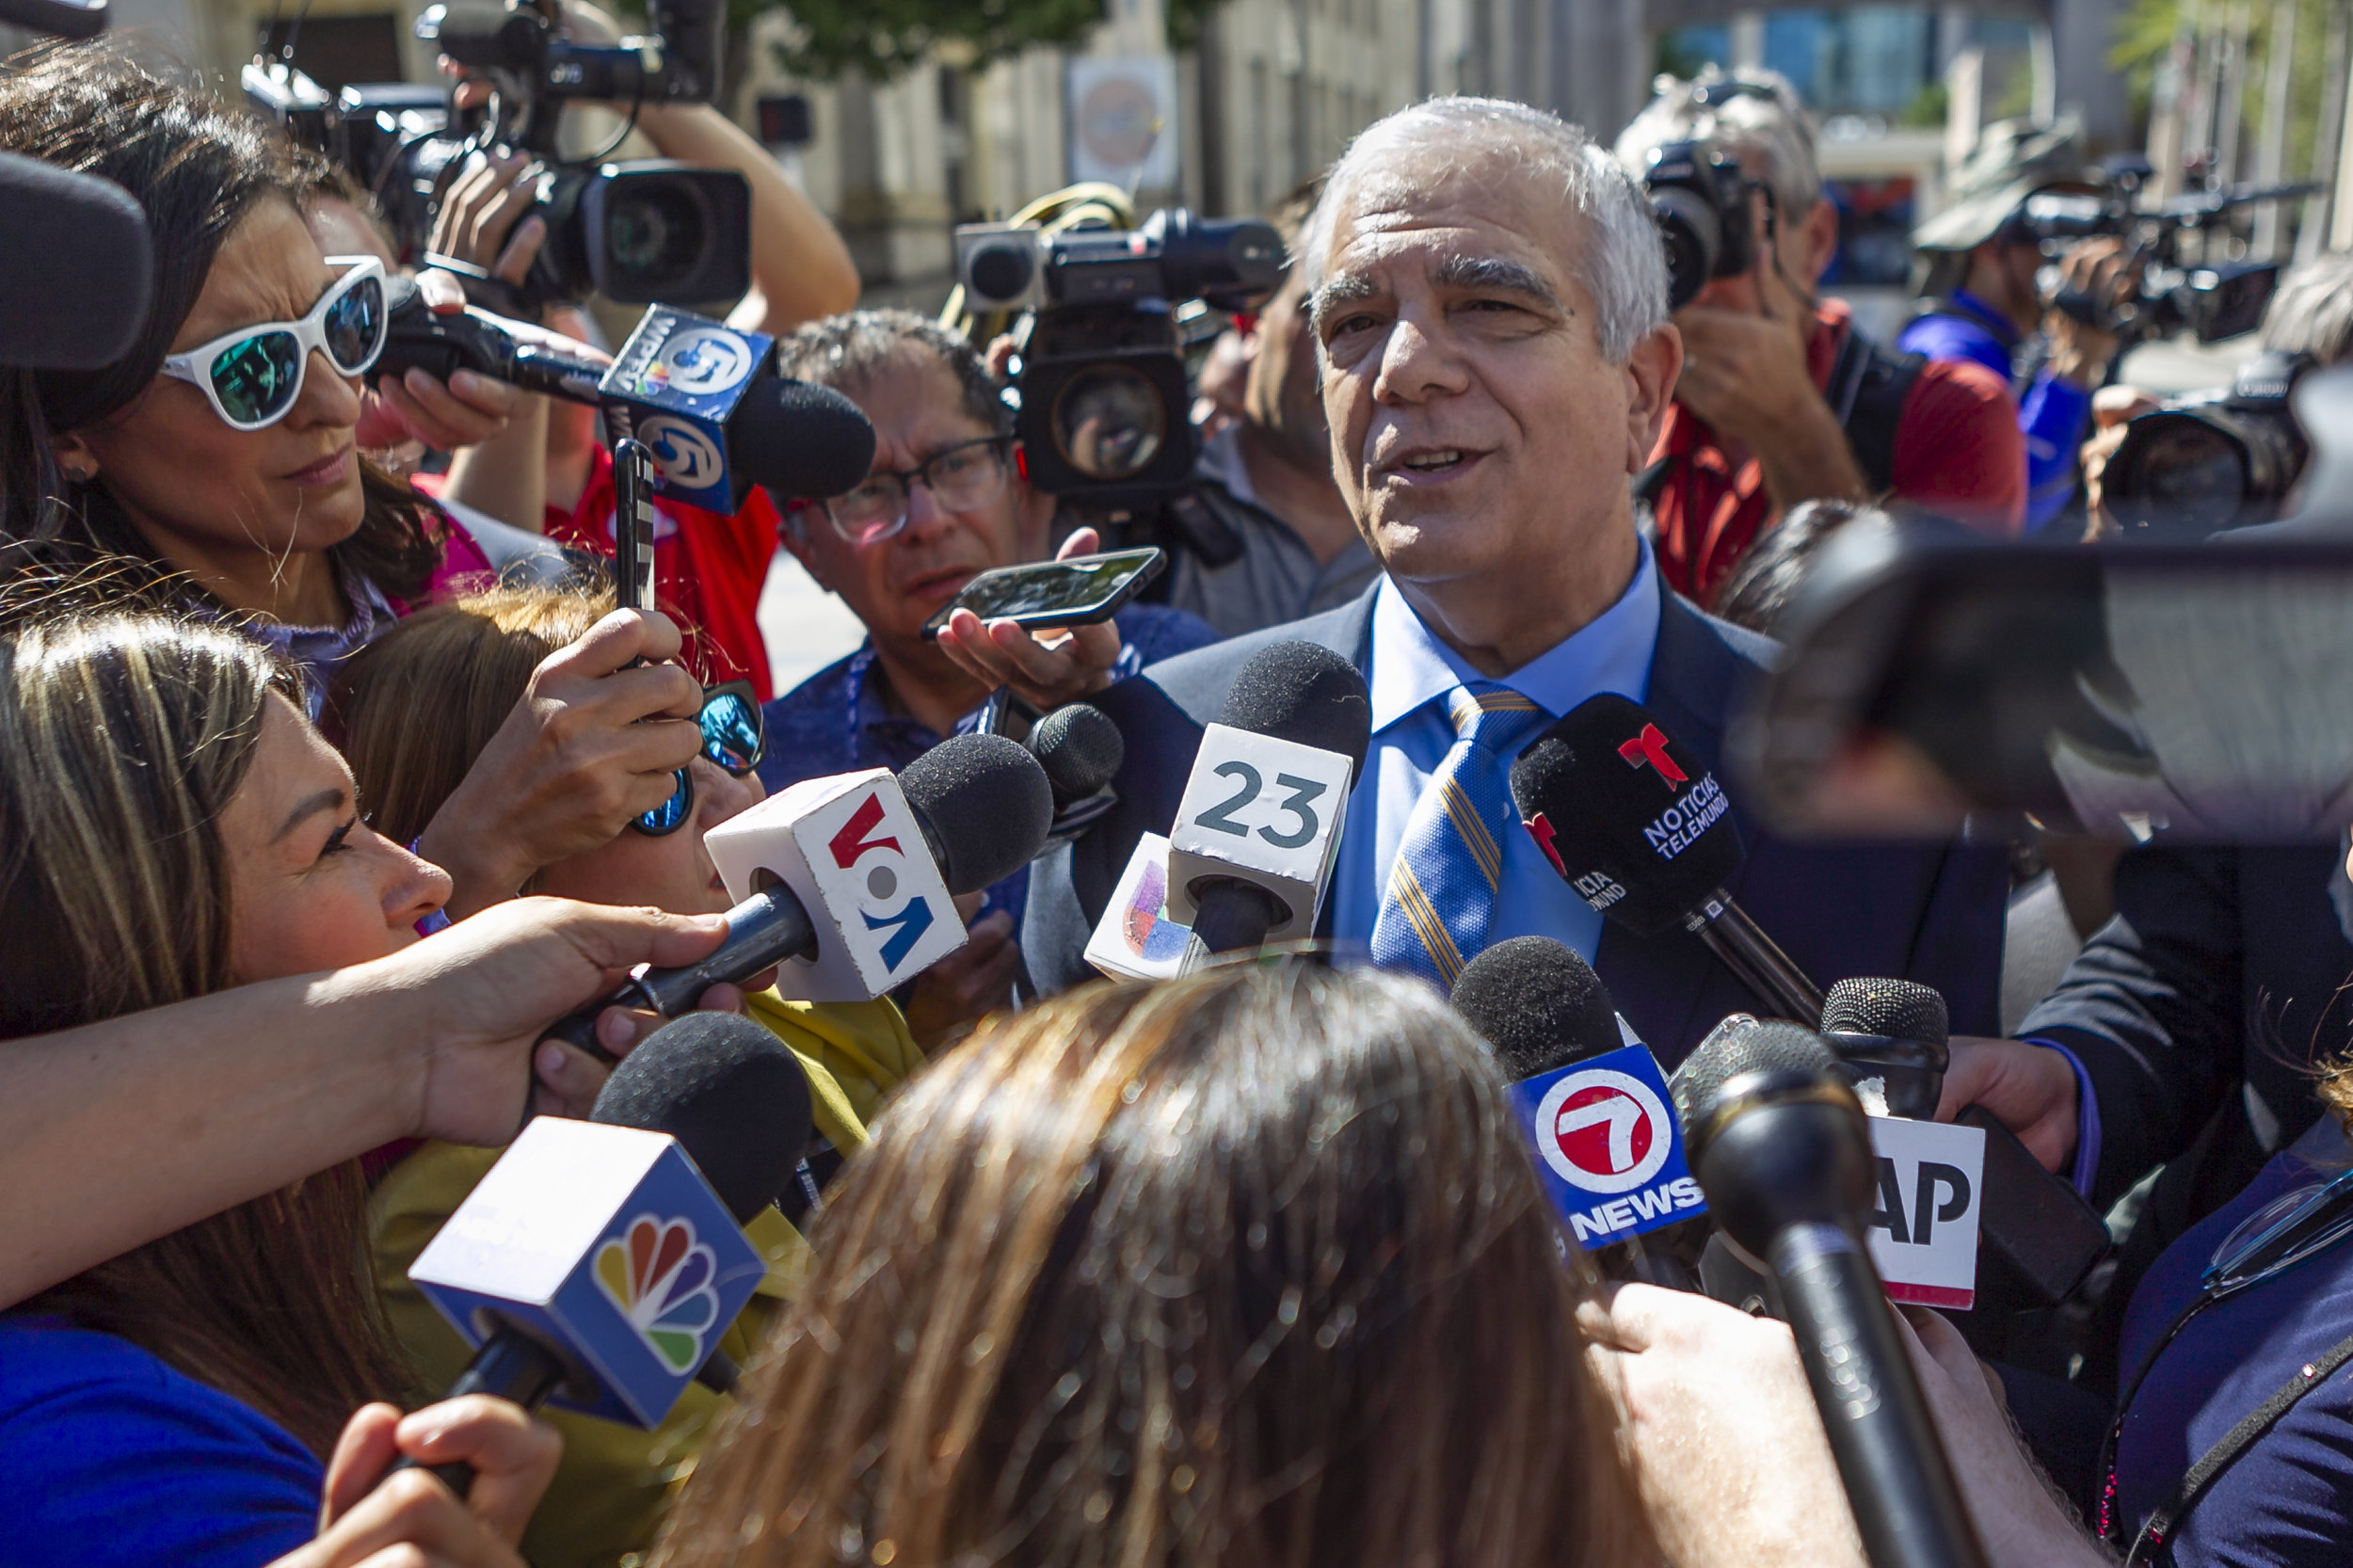  Attorney Daniel Aaronson talks to the media after attending a hearing for his client, Cesar Sayoc, at the Federal District Court for the Southern District of Florida in downtown Miami on Monday, October 29, 2018. 